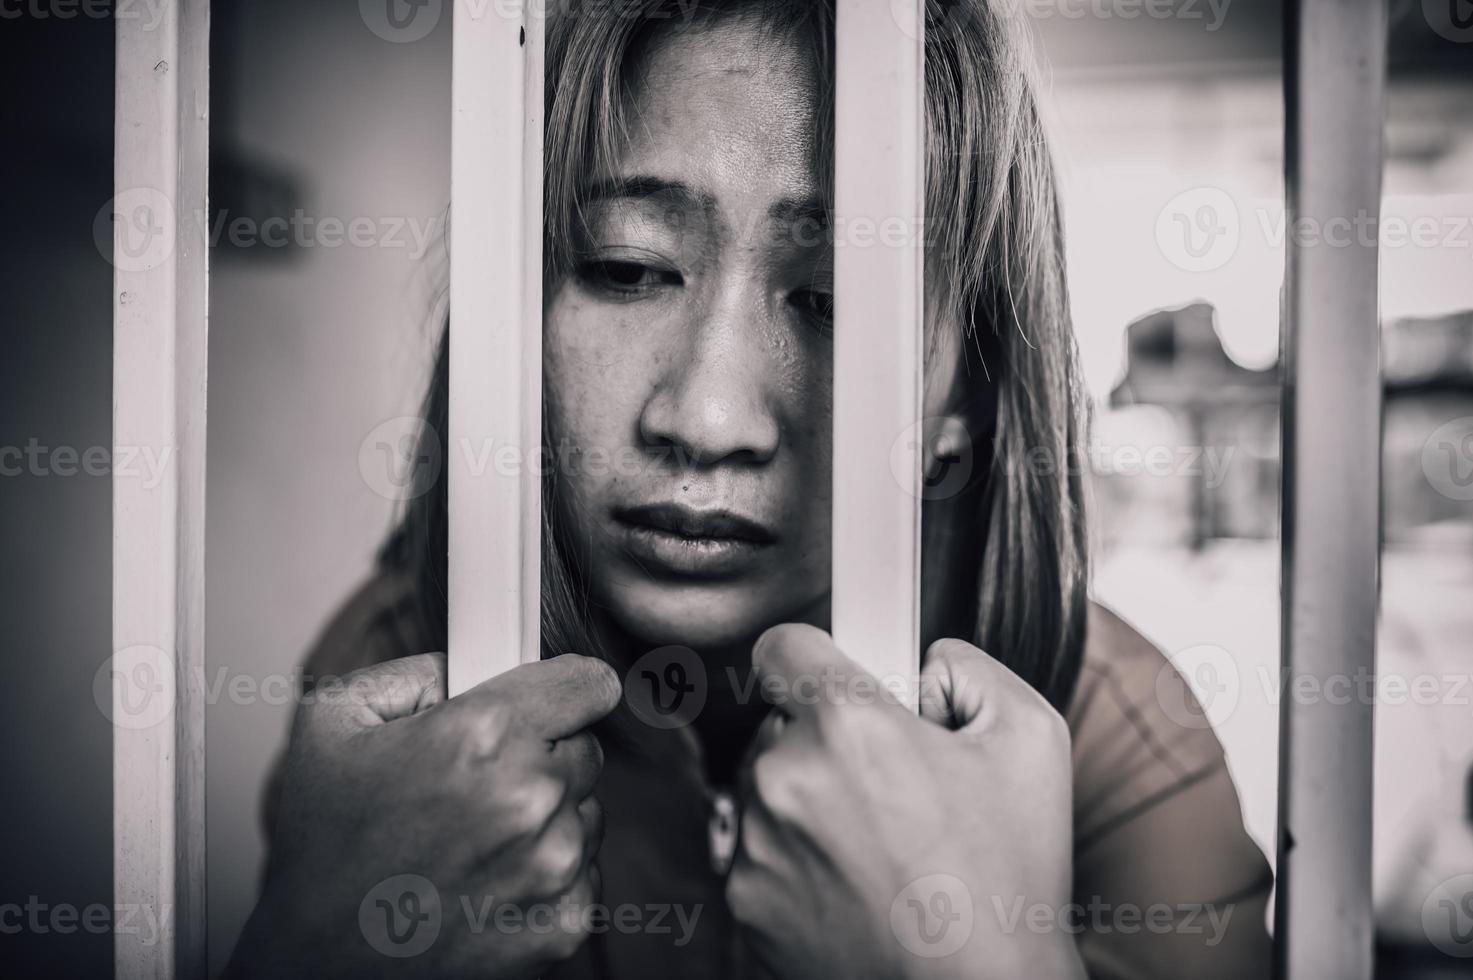 Hands of women desperate to catch the iron prison,prisoner concept,thailand people,Hope to be free,If the violate the law would be arrested and jailed. photo